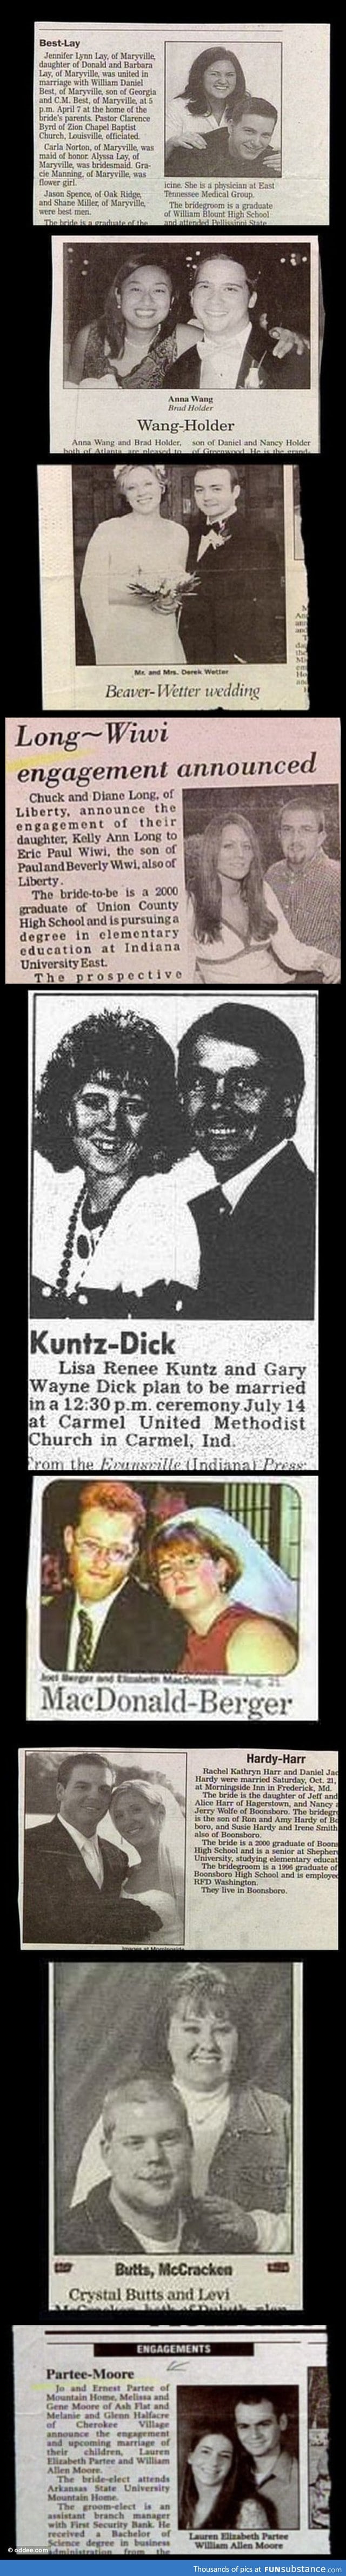 Wedding Announcements From People With Unfortunate Names